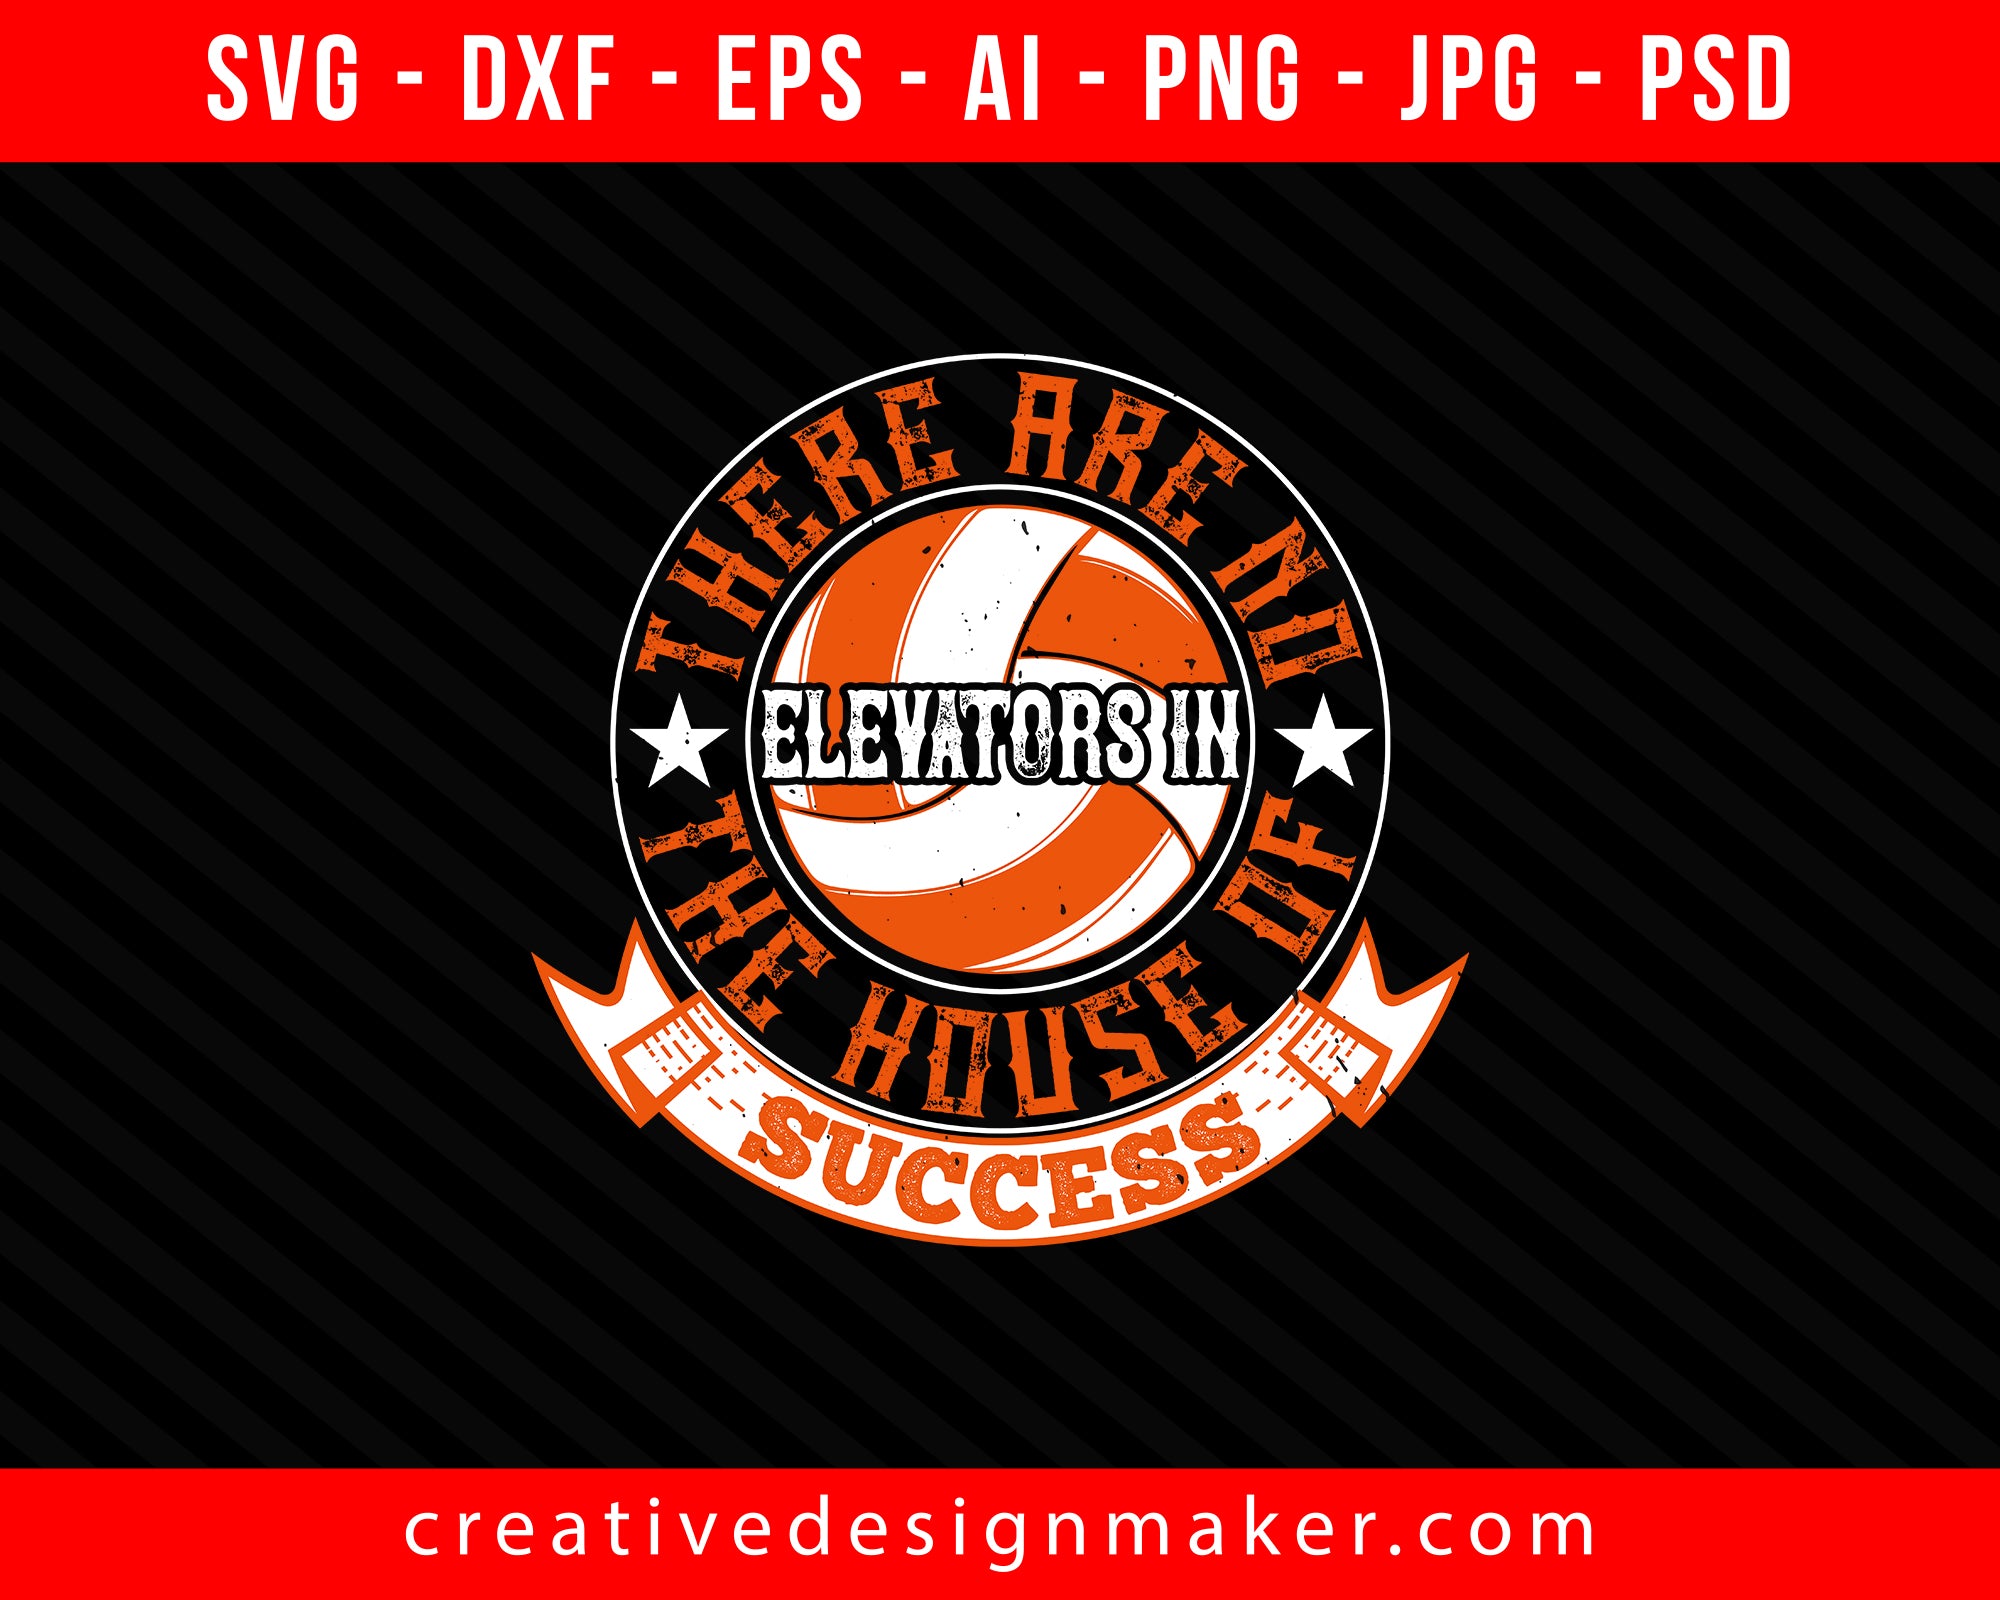 There are no elevators in the house of success Vollyball Print Ready Editable T-Shirt SVG Design!